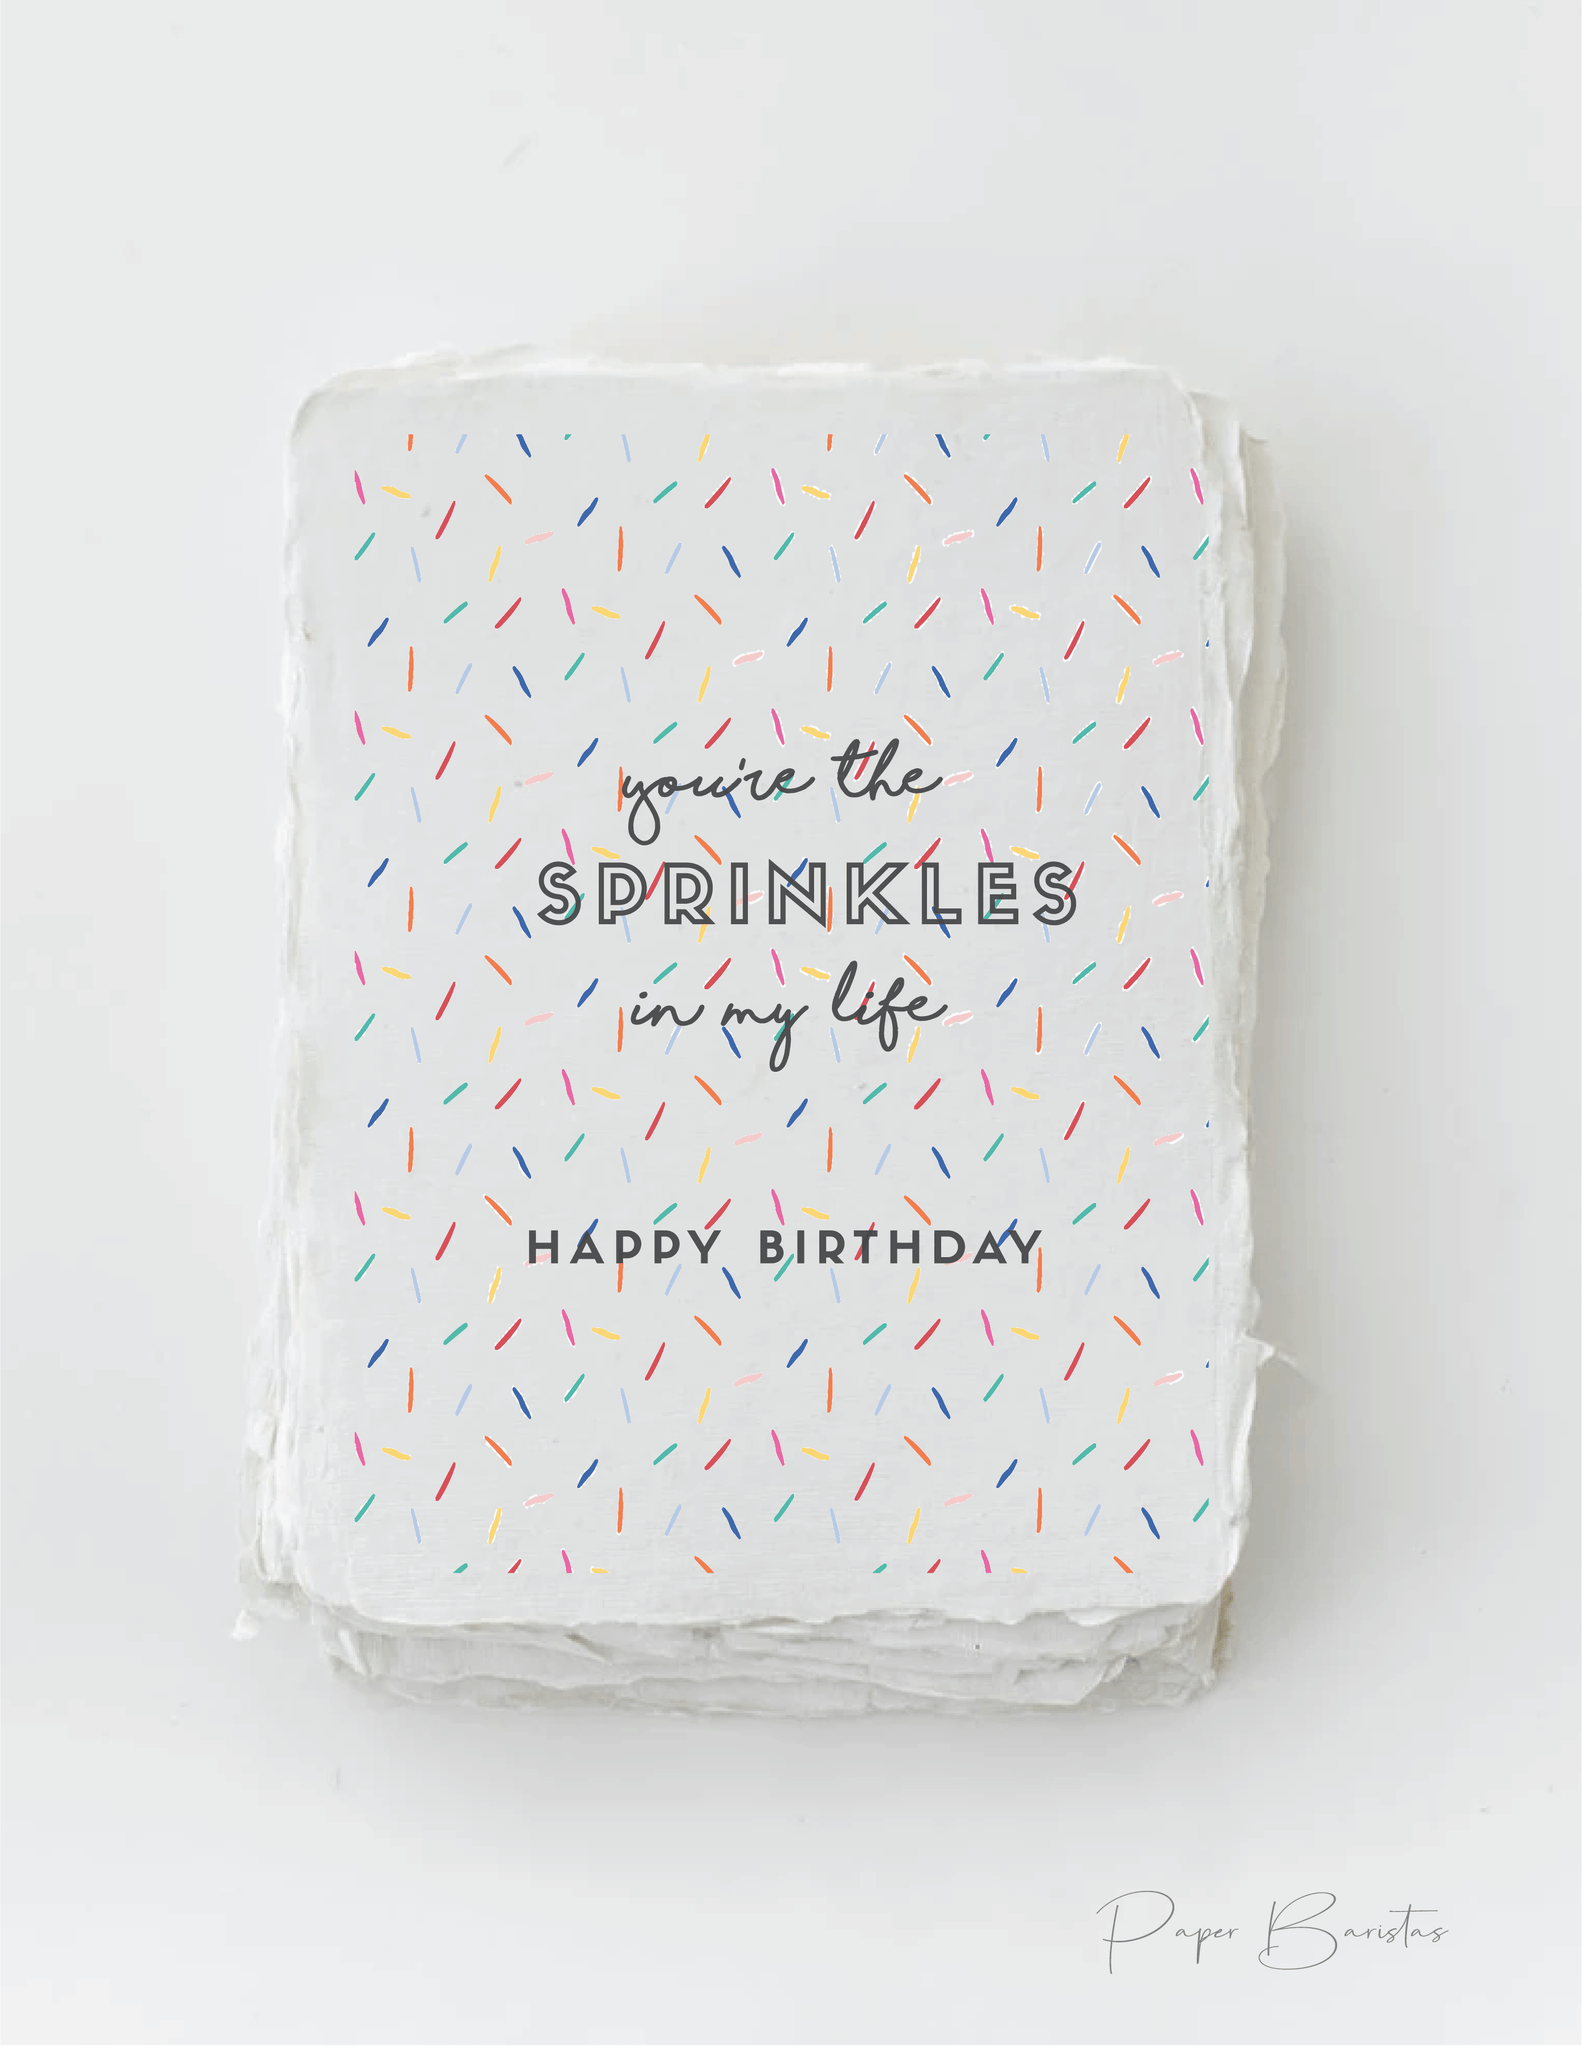 Paper Baristas "You're the Sprinkles" Birthday Friend Greeting Card